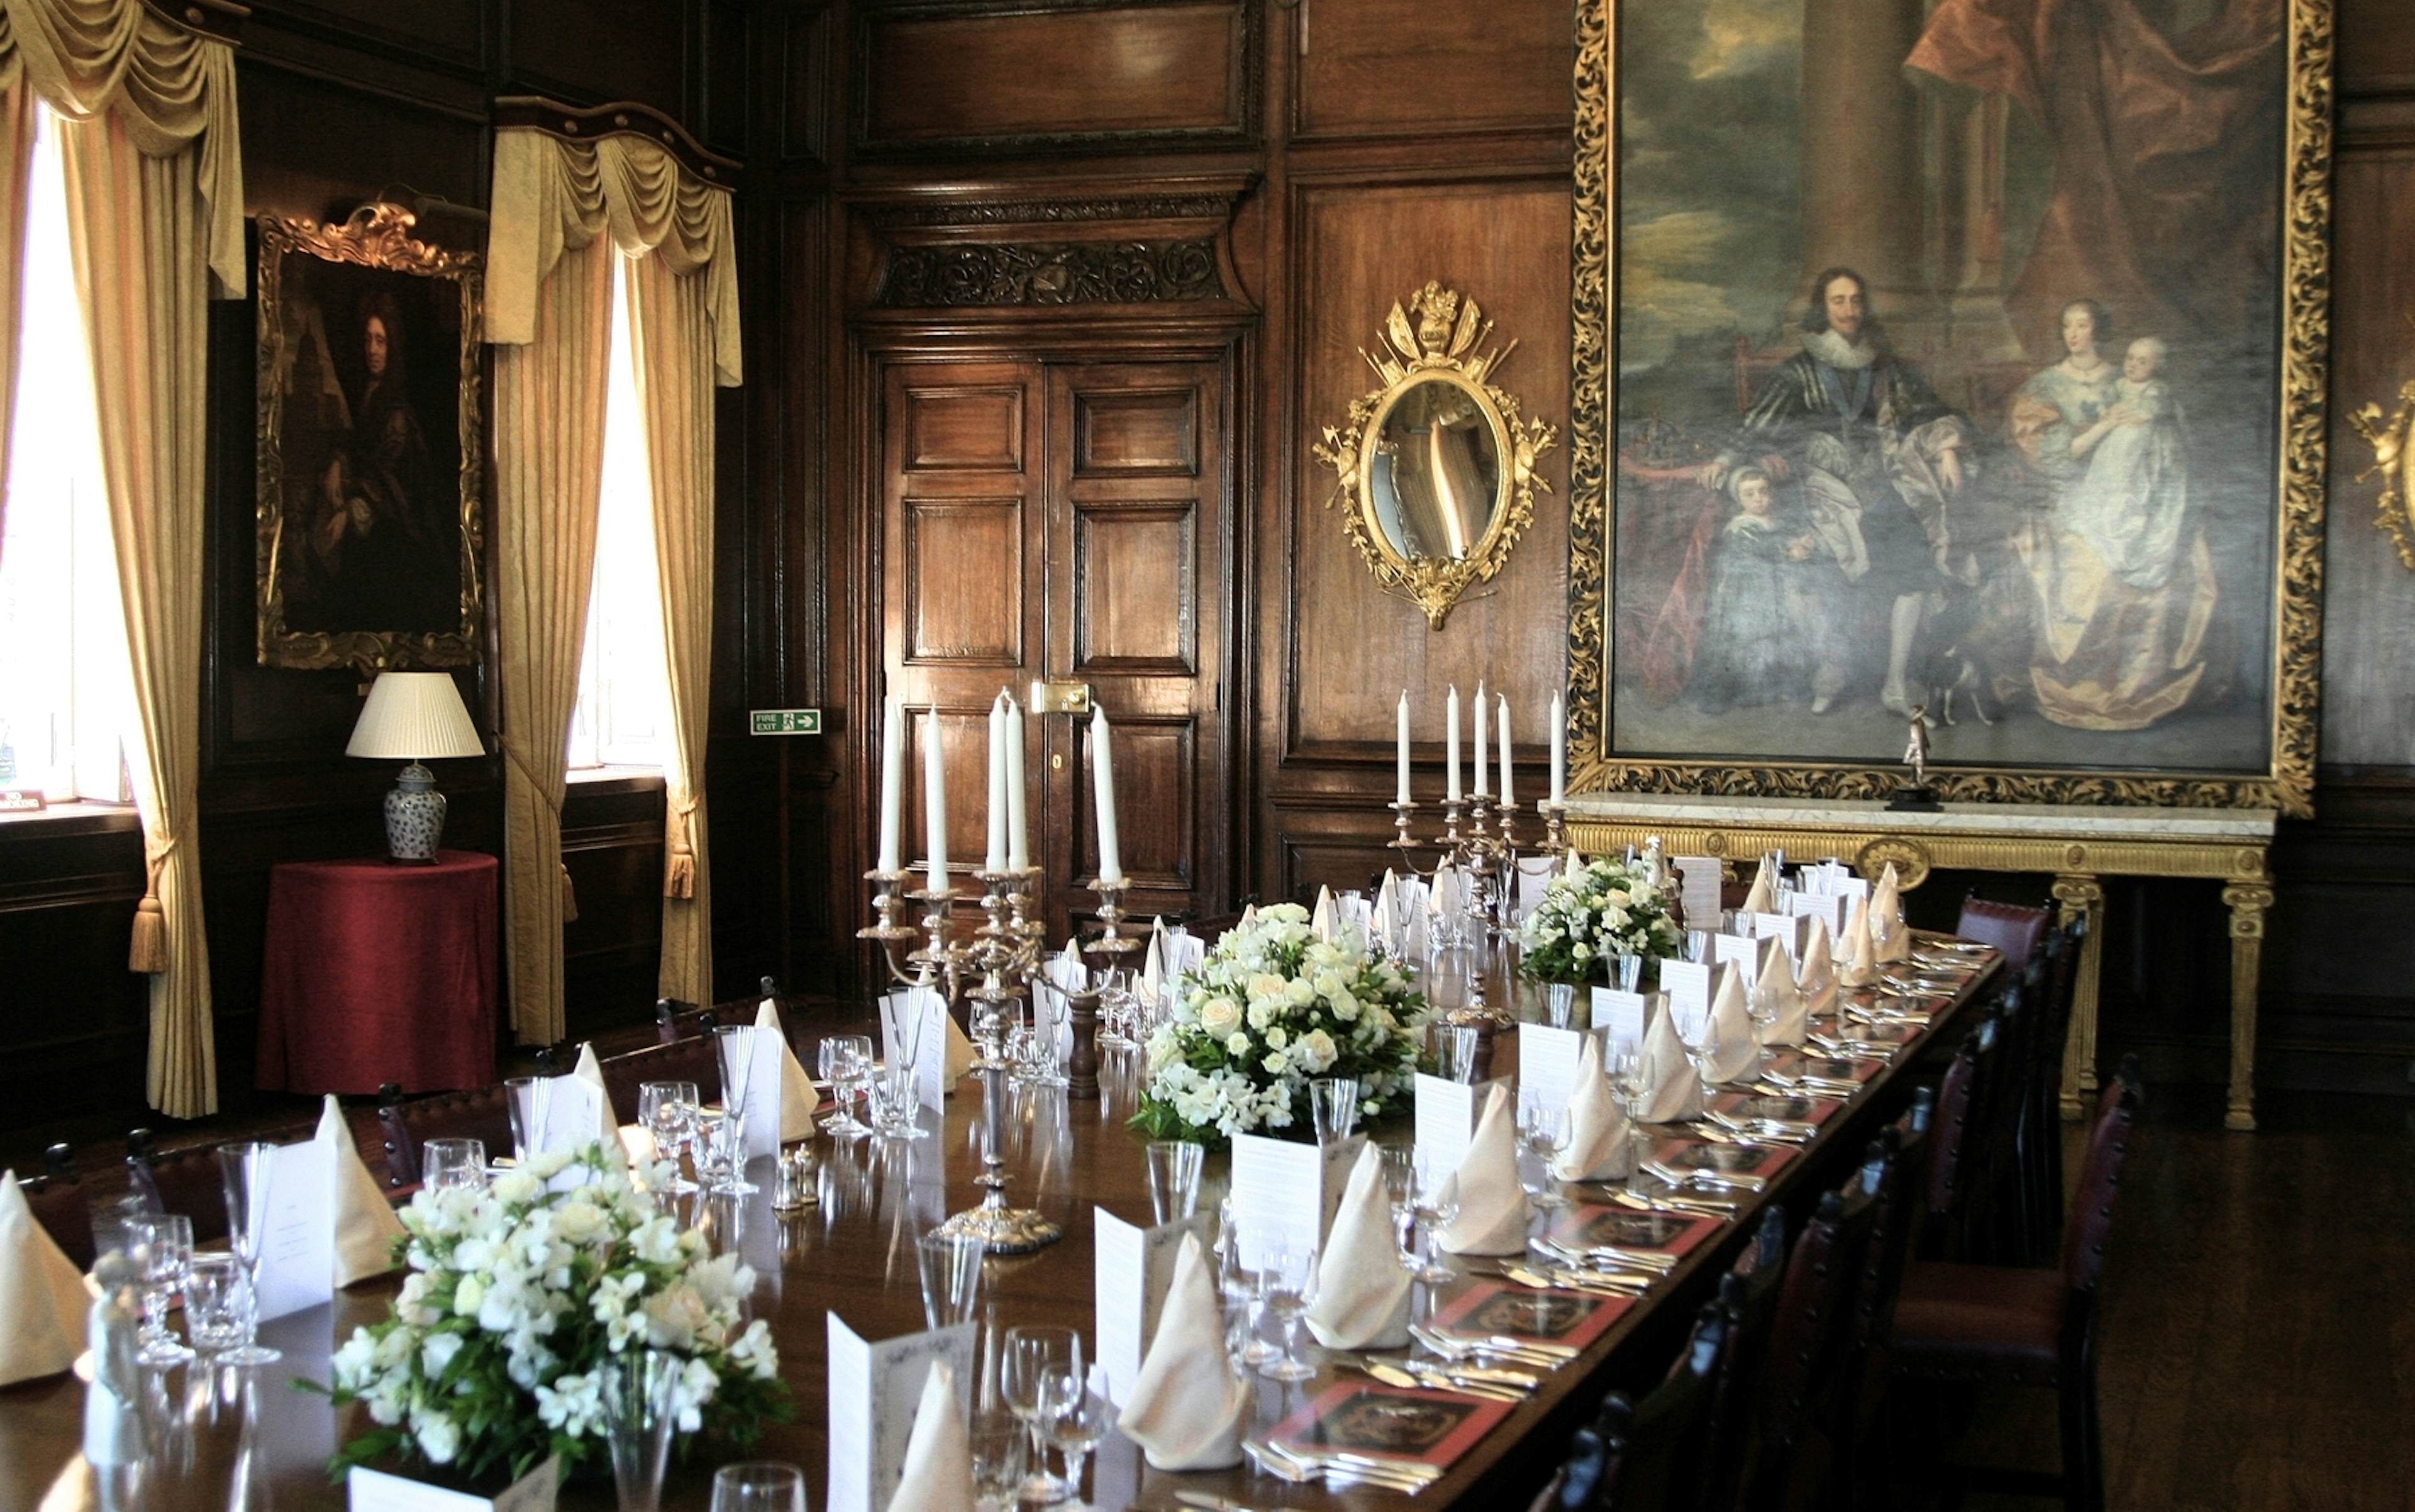 Royal Hospital Chelsea - The State Apartments image 1